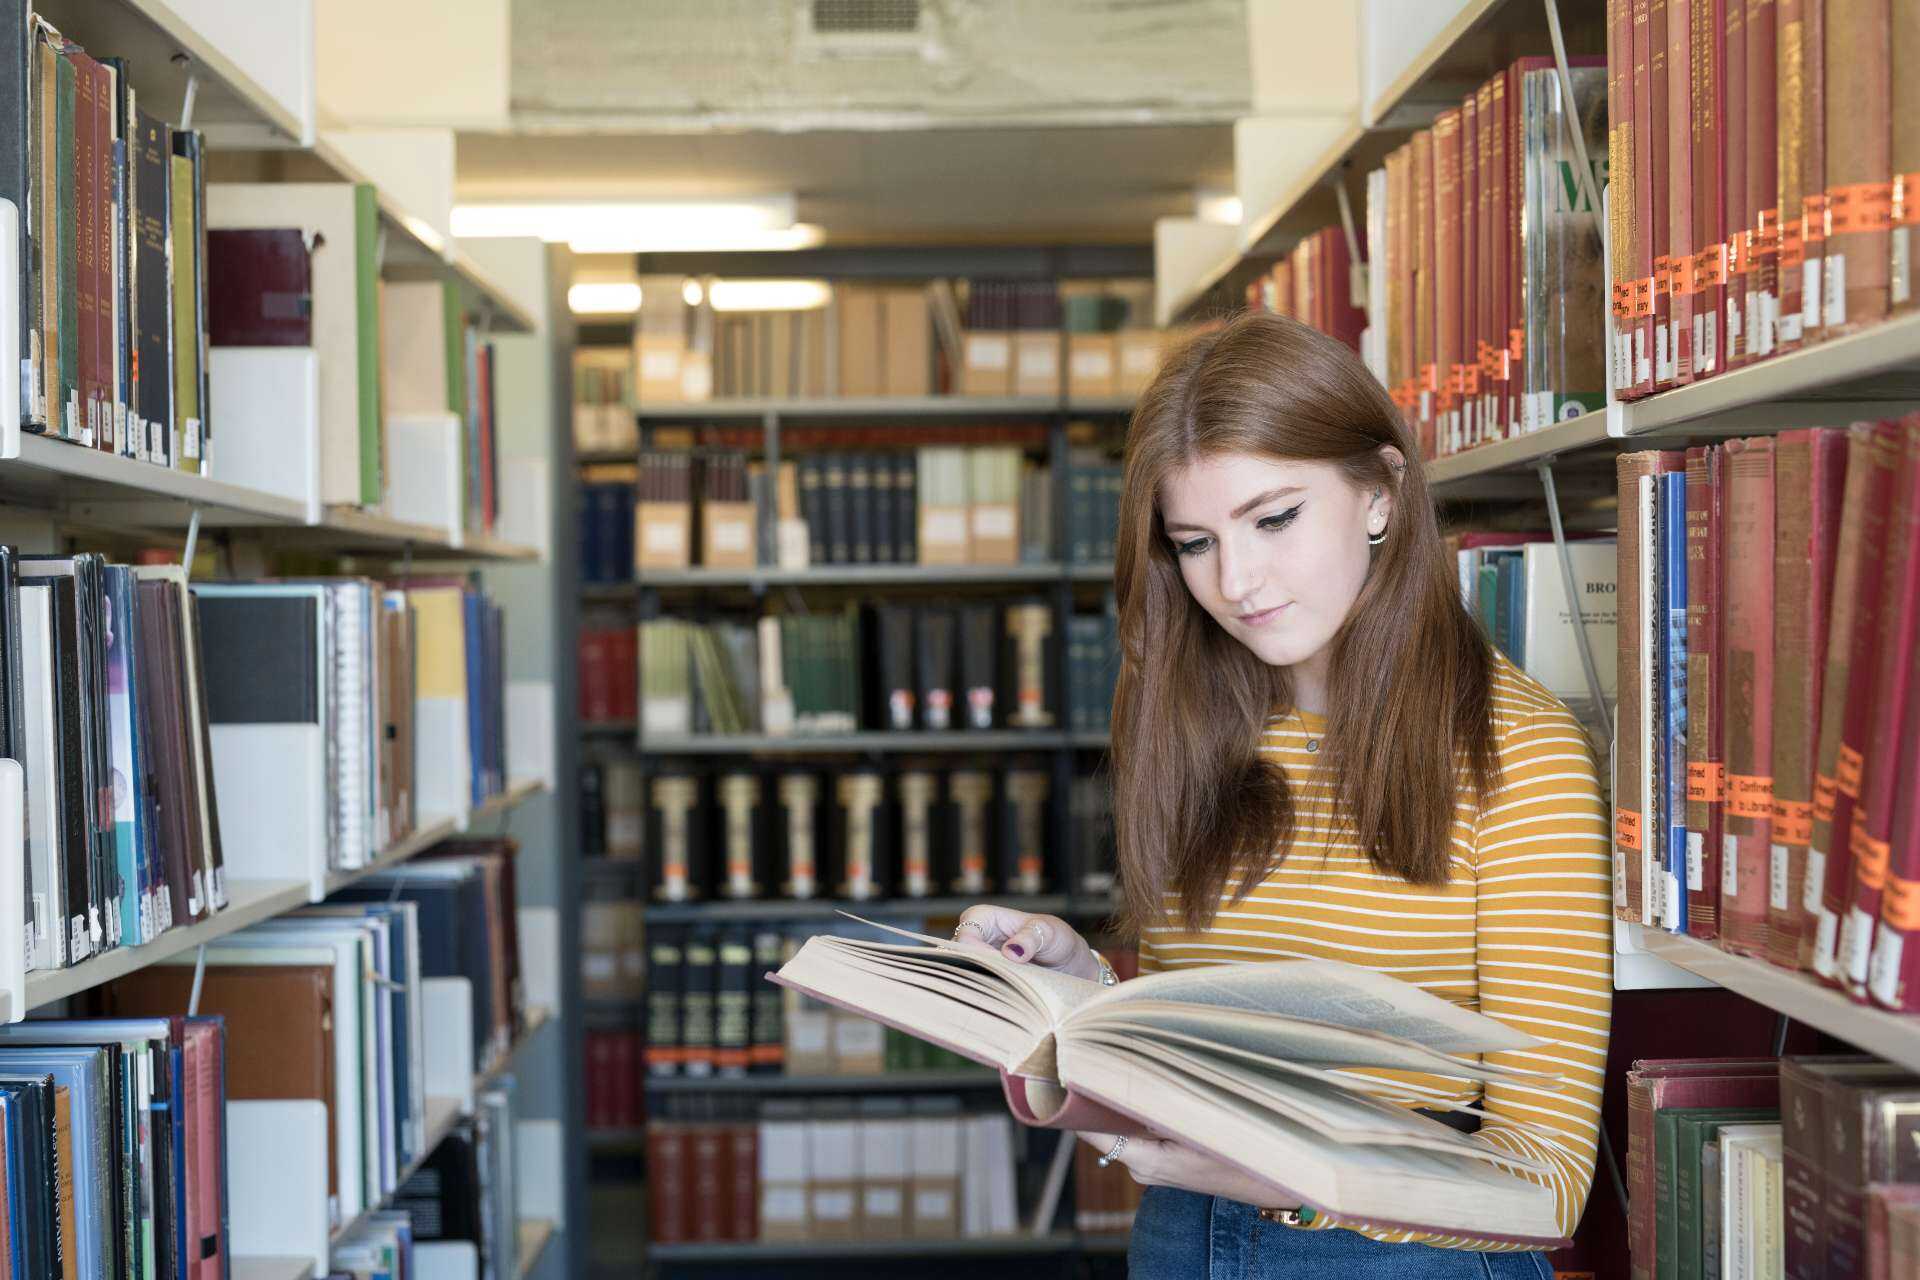 Photograph of female University of Kent student in University library, looking through an open book